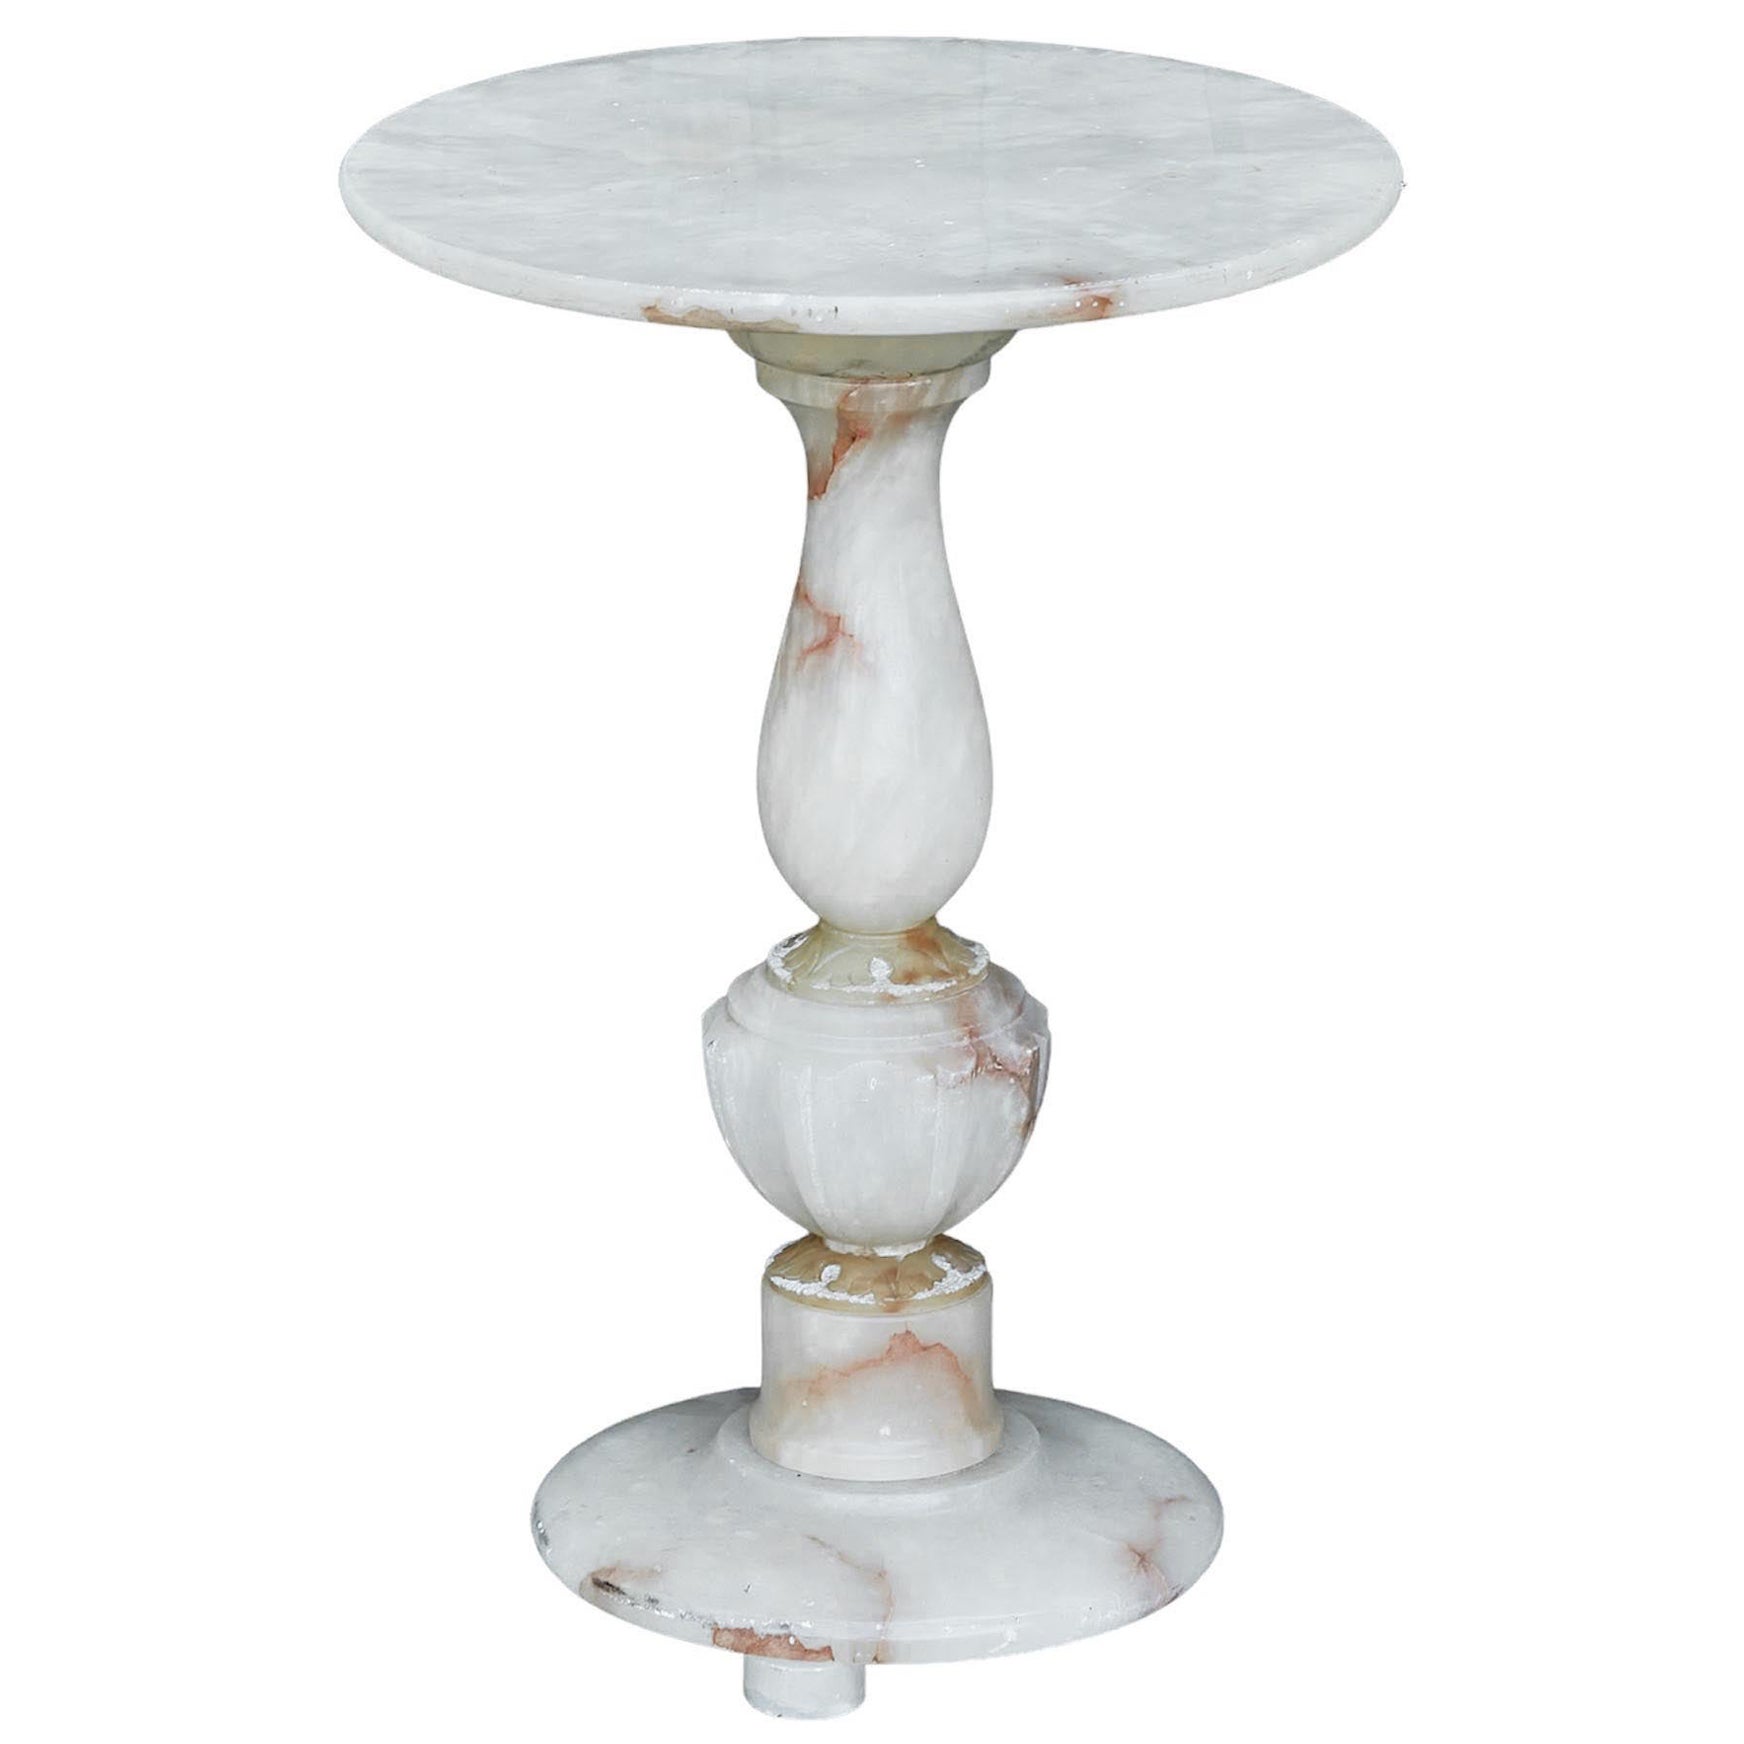 French 1920s Alabaster Guéridon Side Table with Circular Top and Pedestal Base For Sale